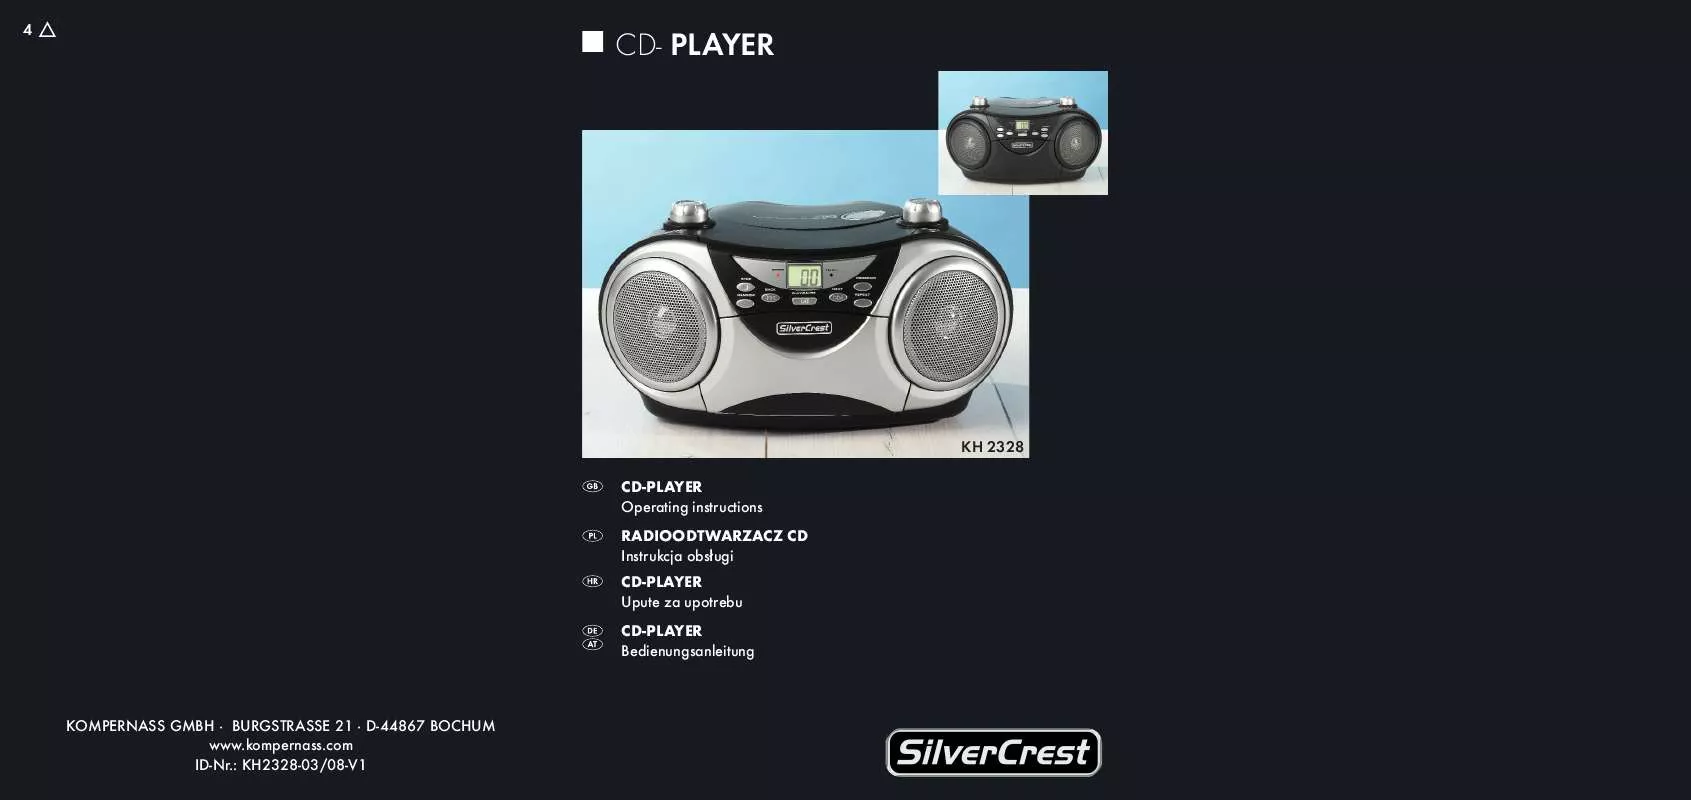 Mode d'emploi SILVERCREST KH 2328 CD-PLAYER WITH RADIO